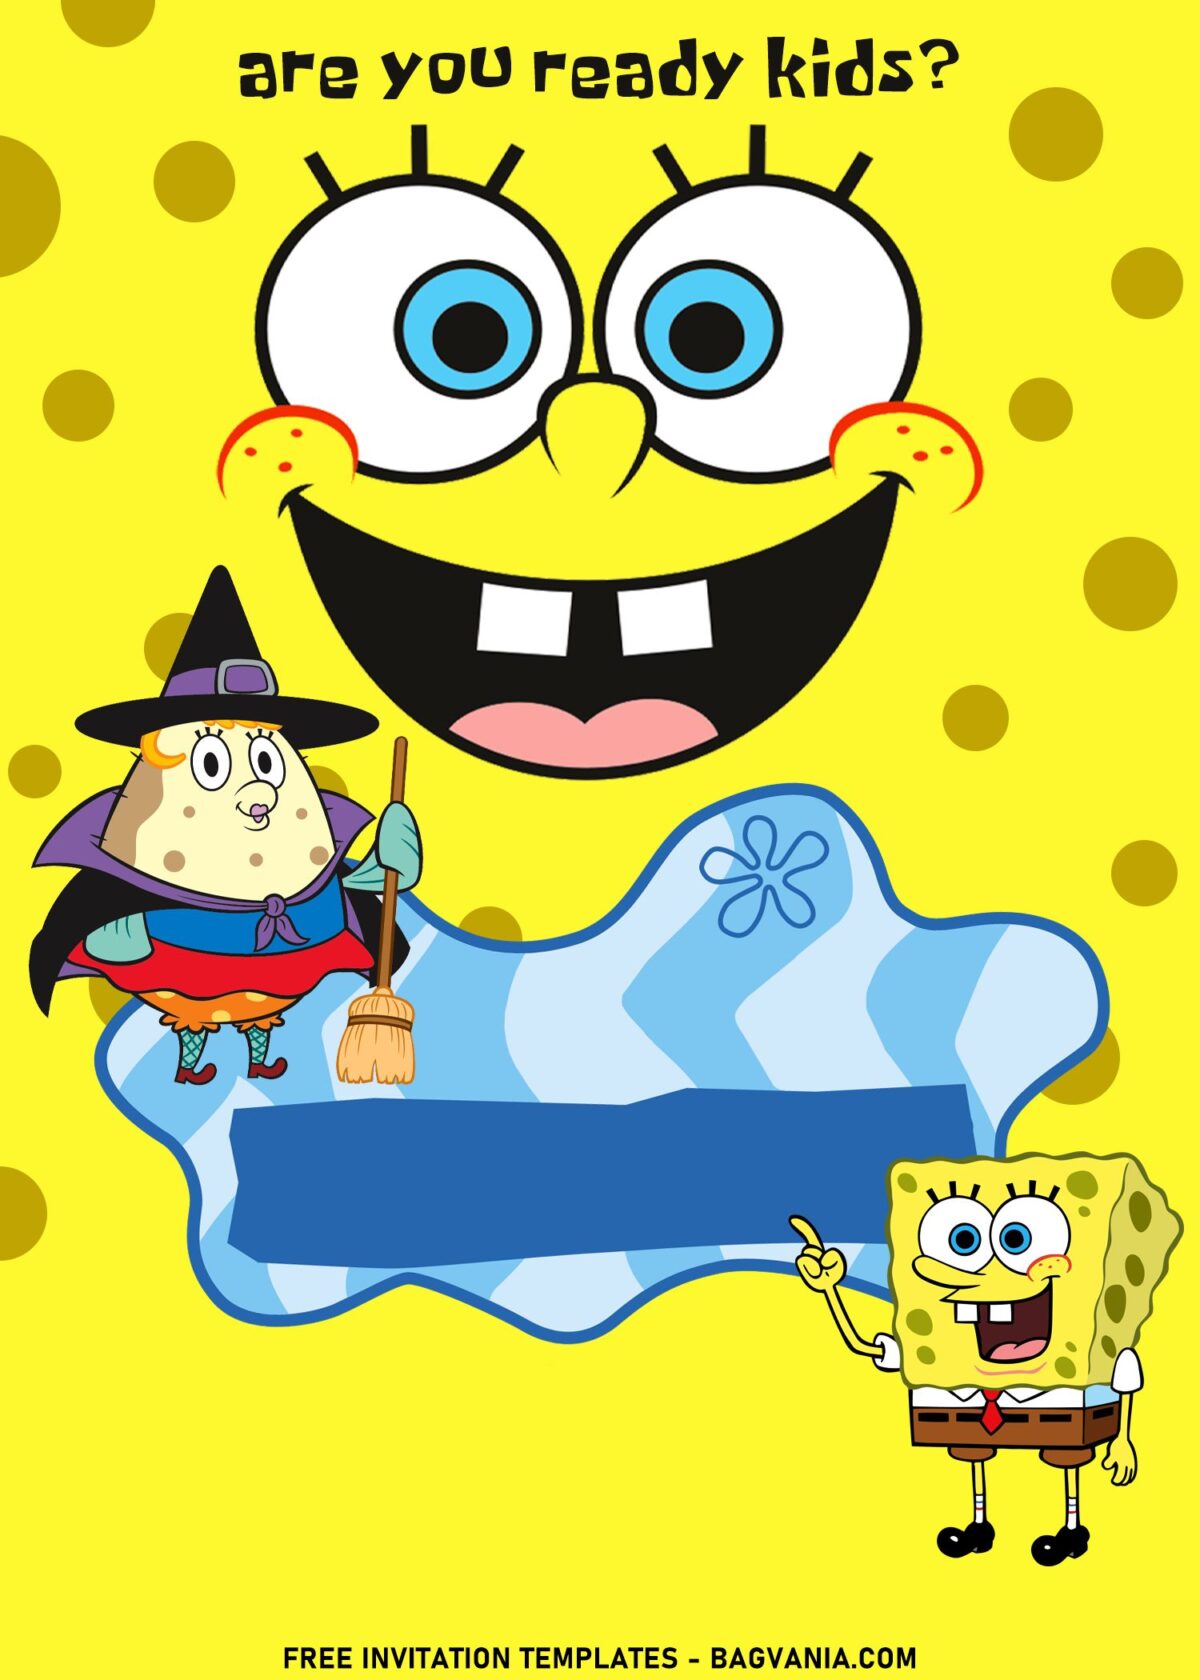 11+ Bright And Colorful SpongeBob Birthday Invitation Templates with Mrs. Puff in Magician costume